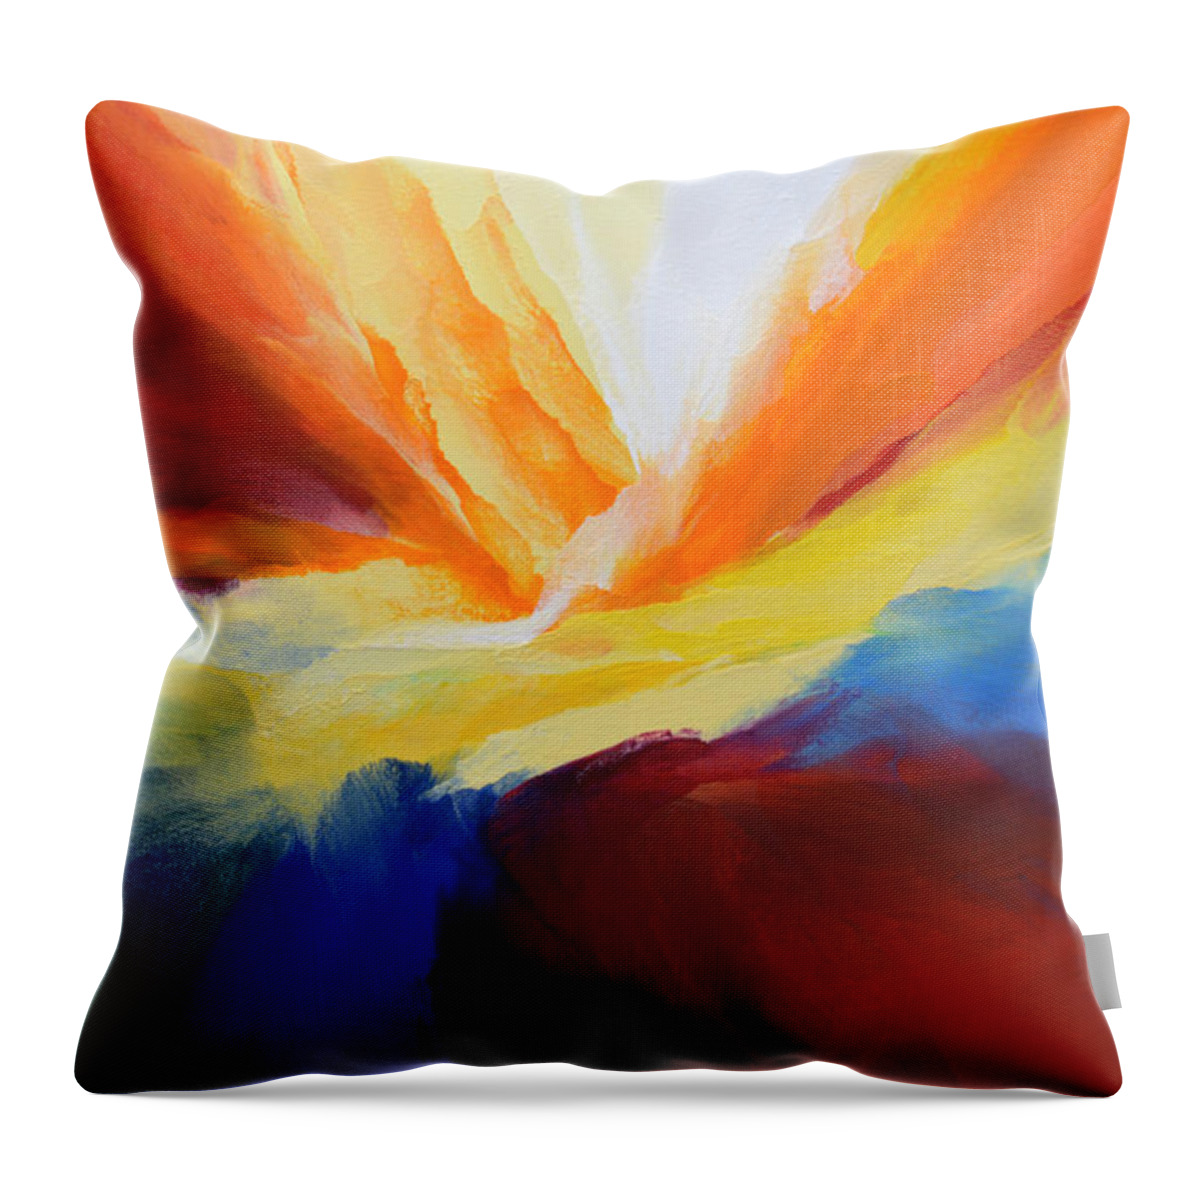 Pour Throw Pillow featuring the painting Pour Out Your Heart by Linda Bailey